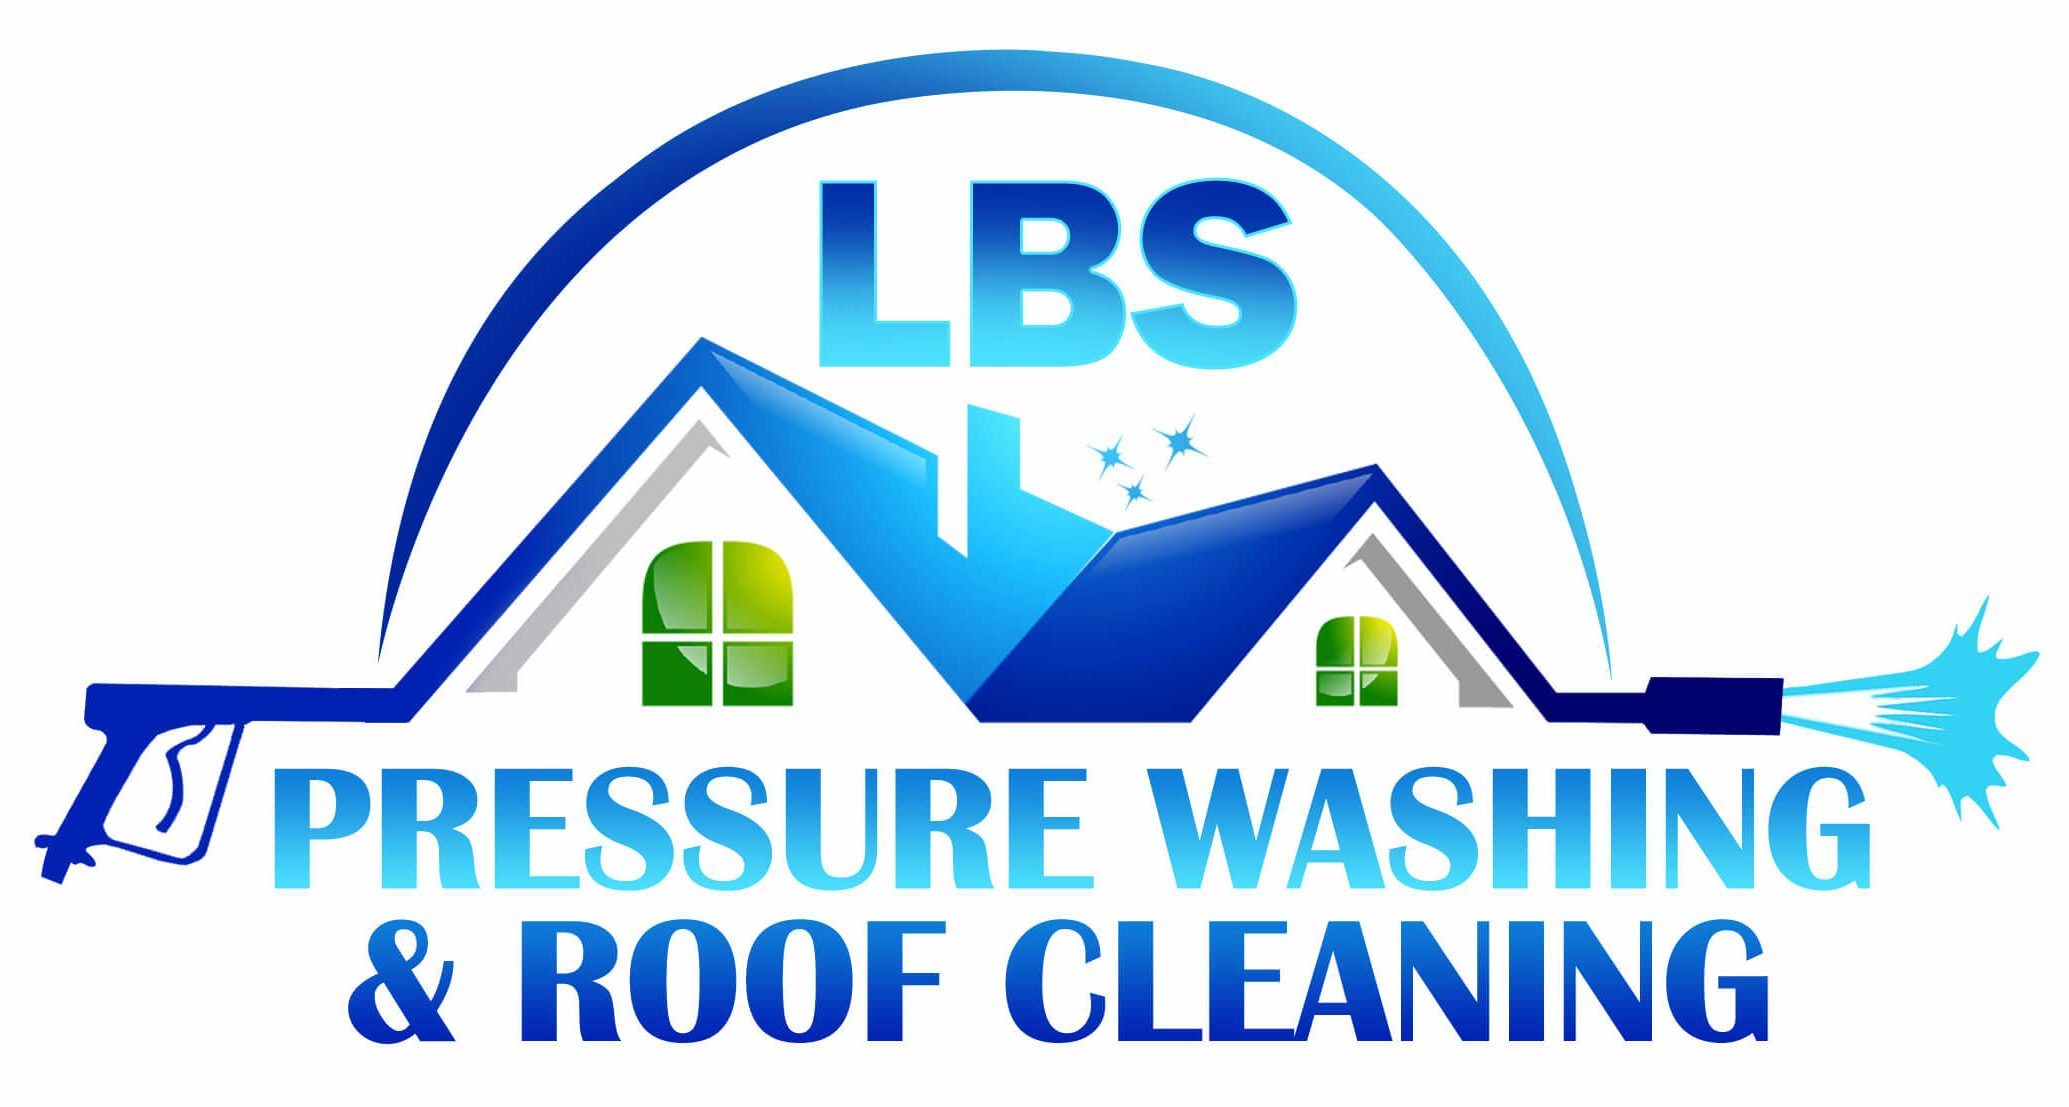 LBS Pressure Washing & Roof Cleaning logo